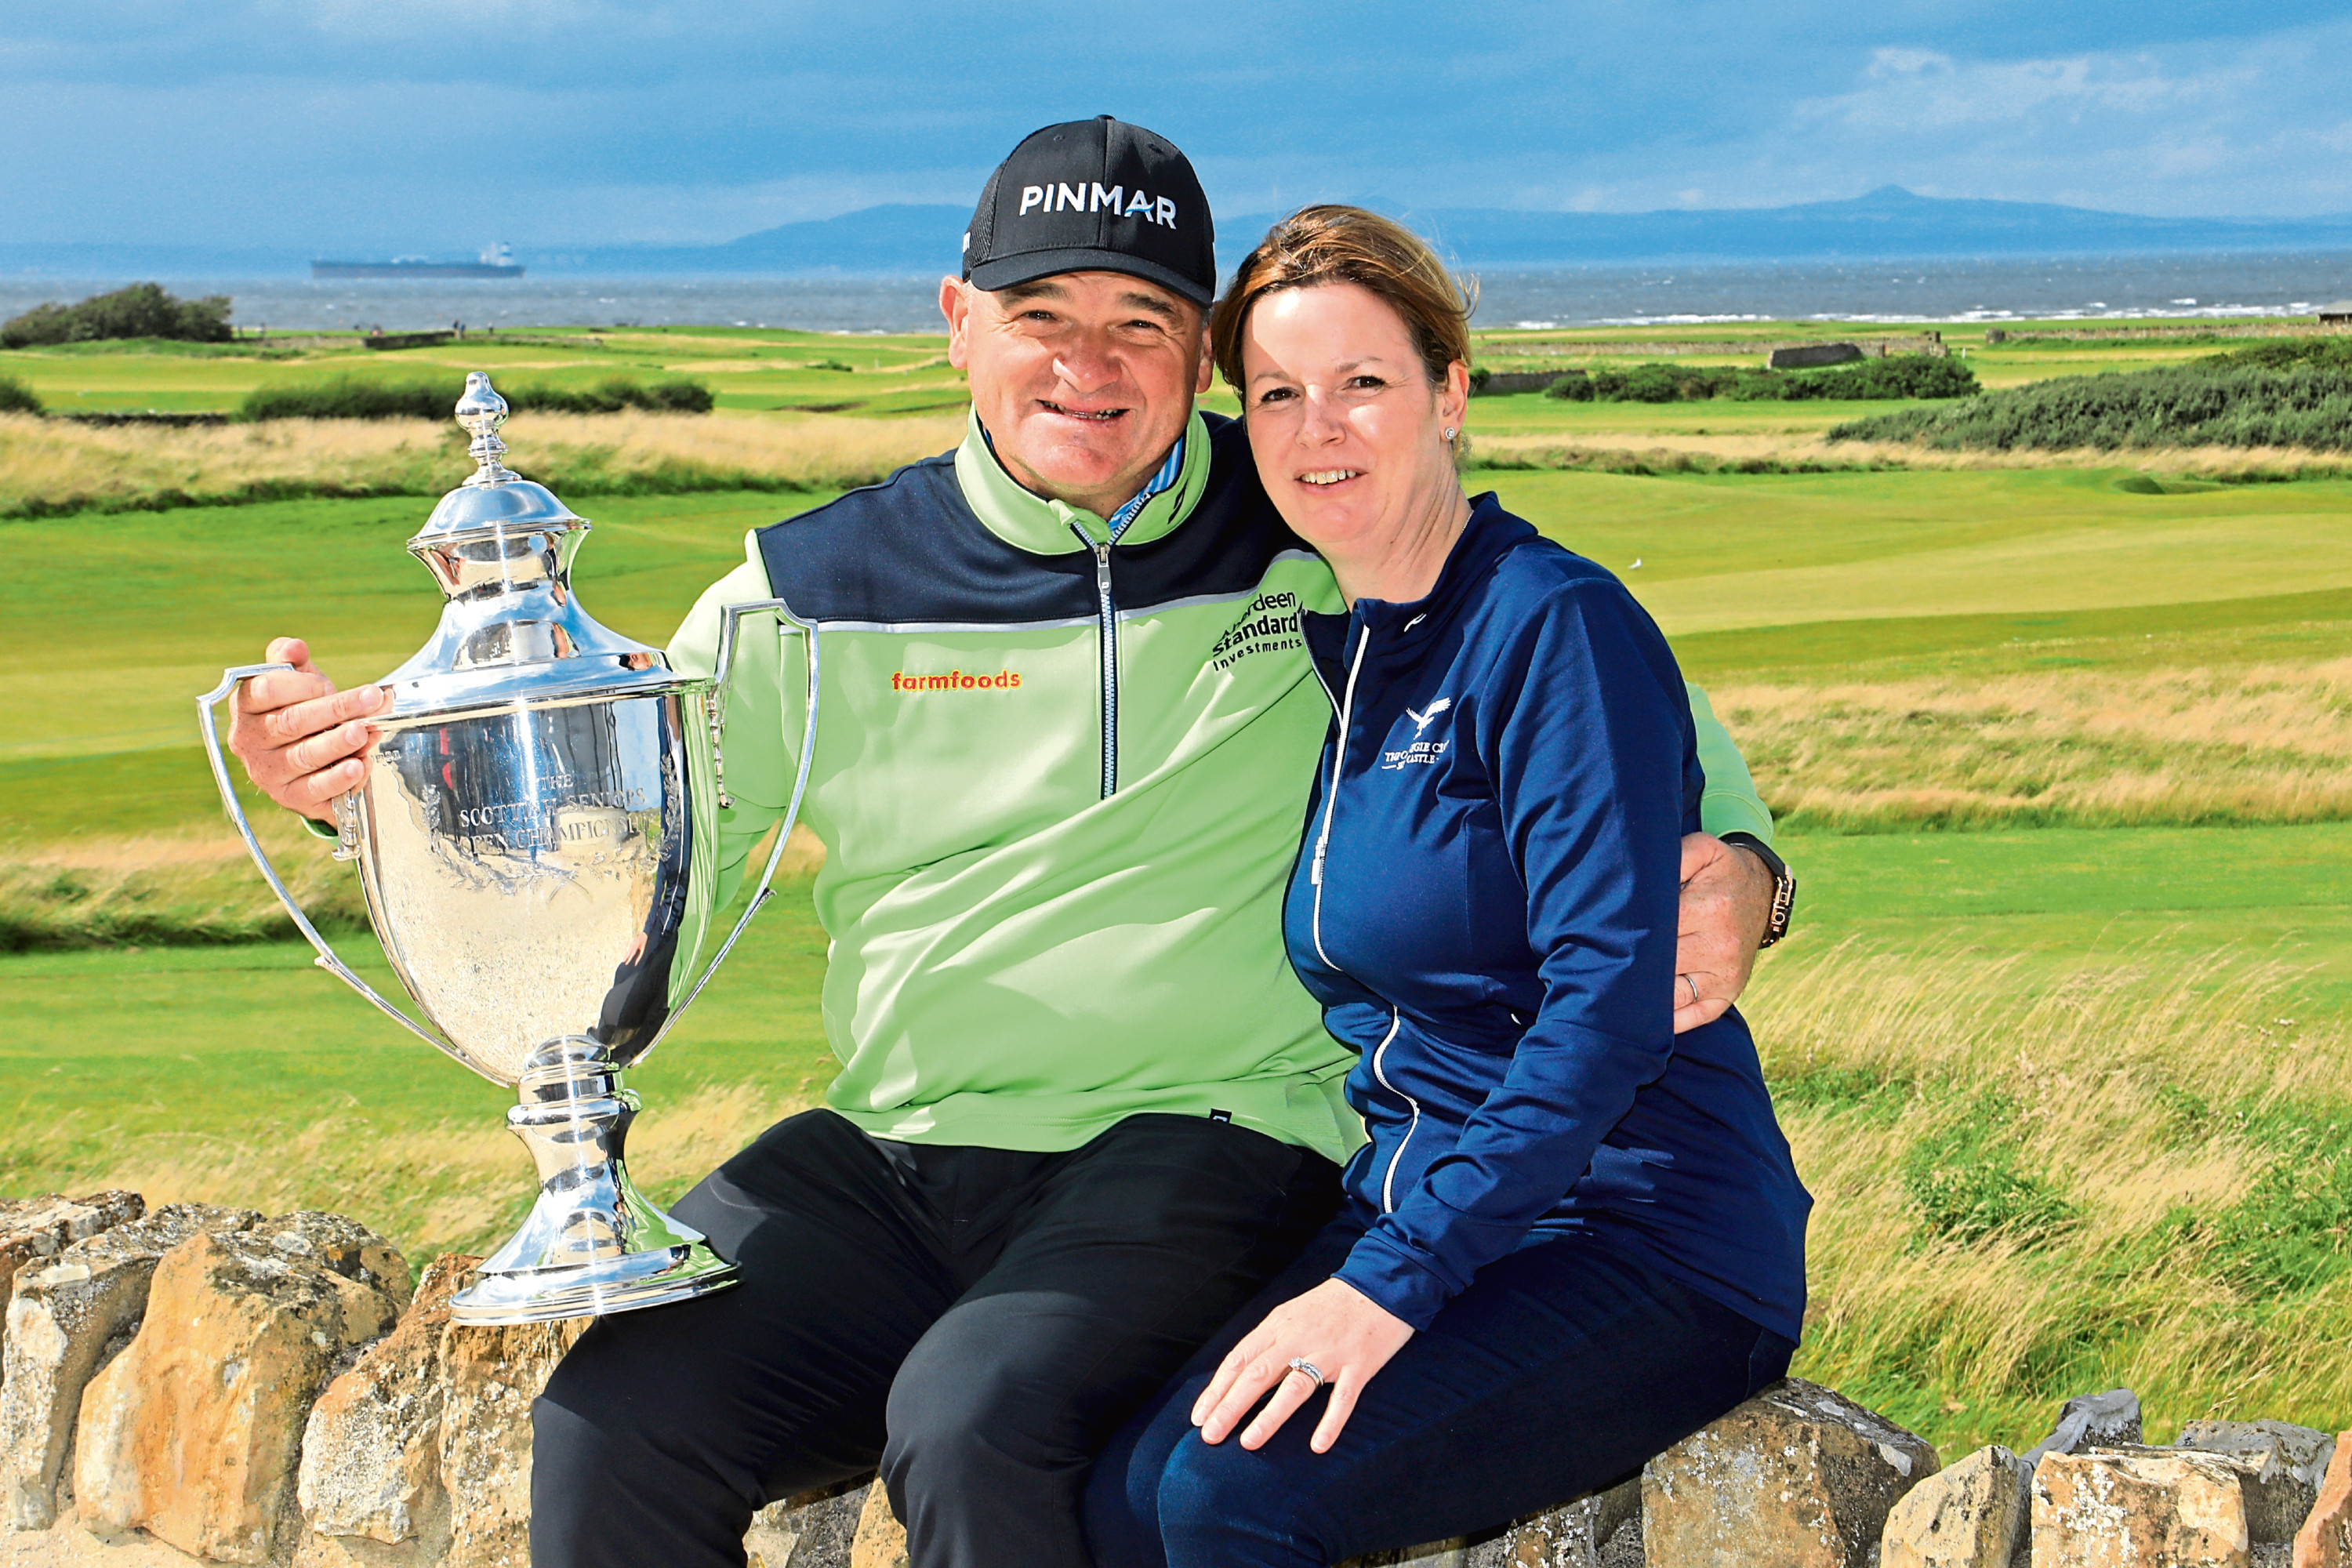 Paul Lawrie of Scotland and his wife Marian pose for a photograph after winning the Scottish Senior Open played at Craigielaw Golf Club.